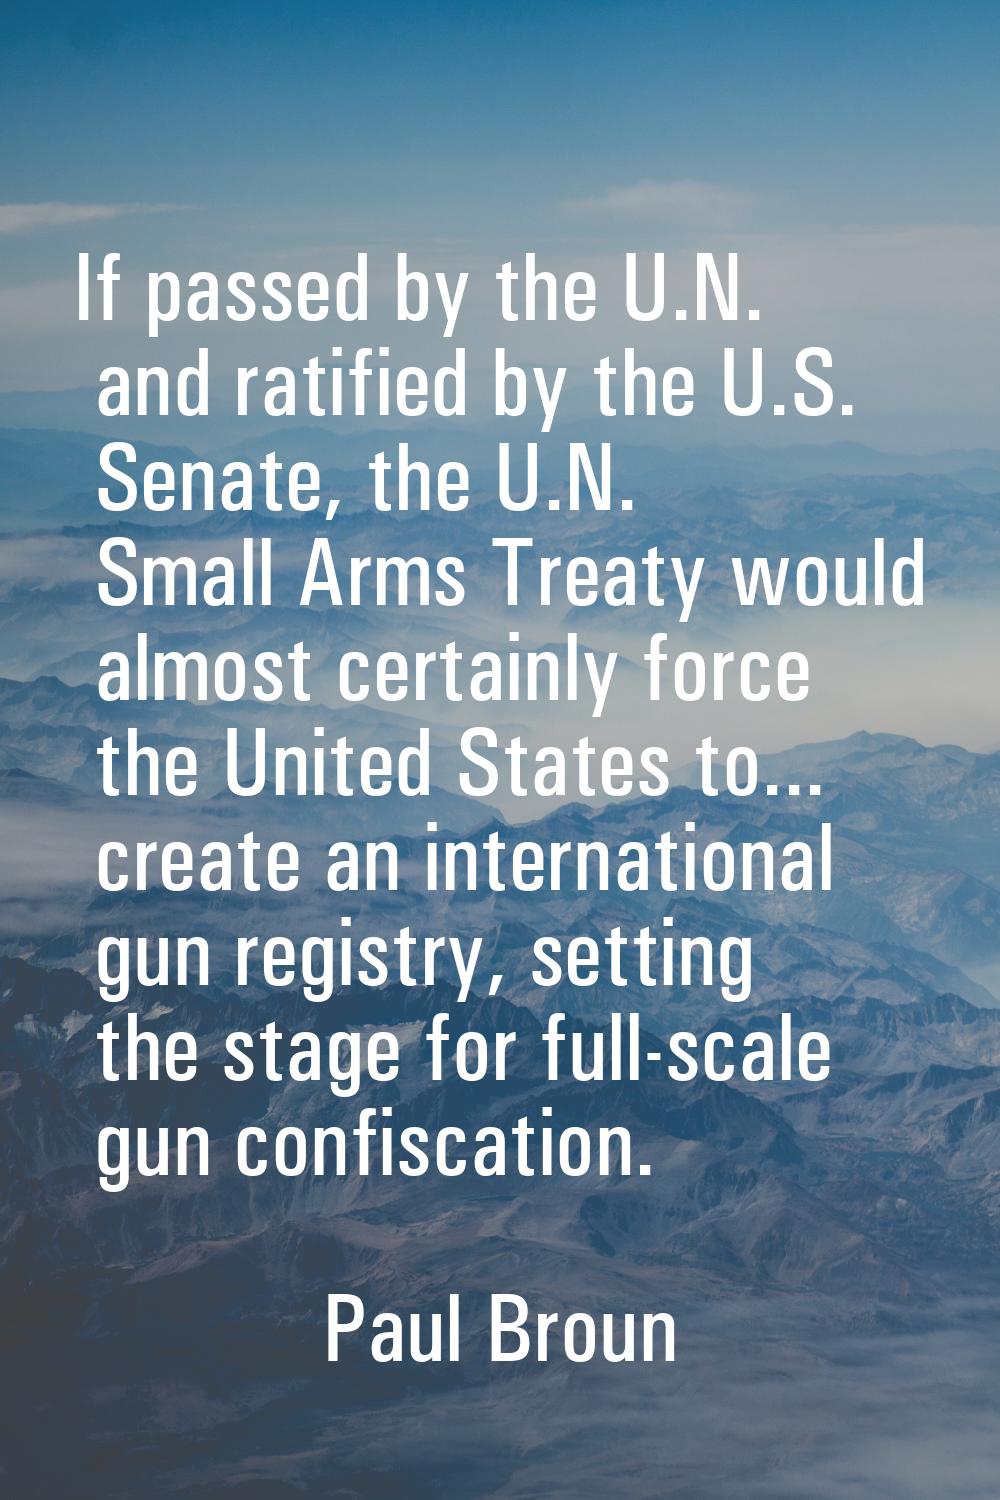 If passed by the U.N. and ratified by the U.S. Senate, the U.N. Small Arms Treaty would almost cert